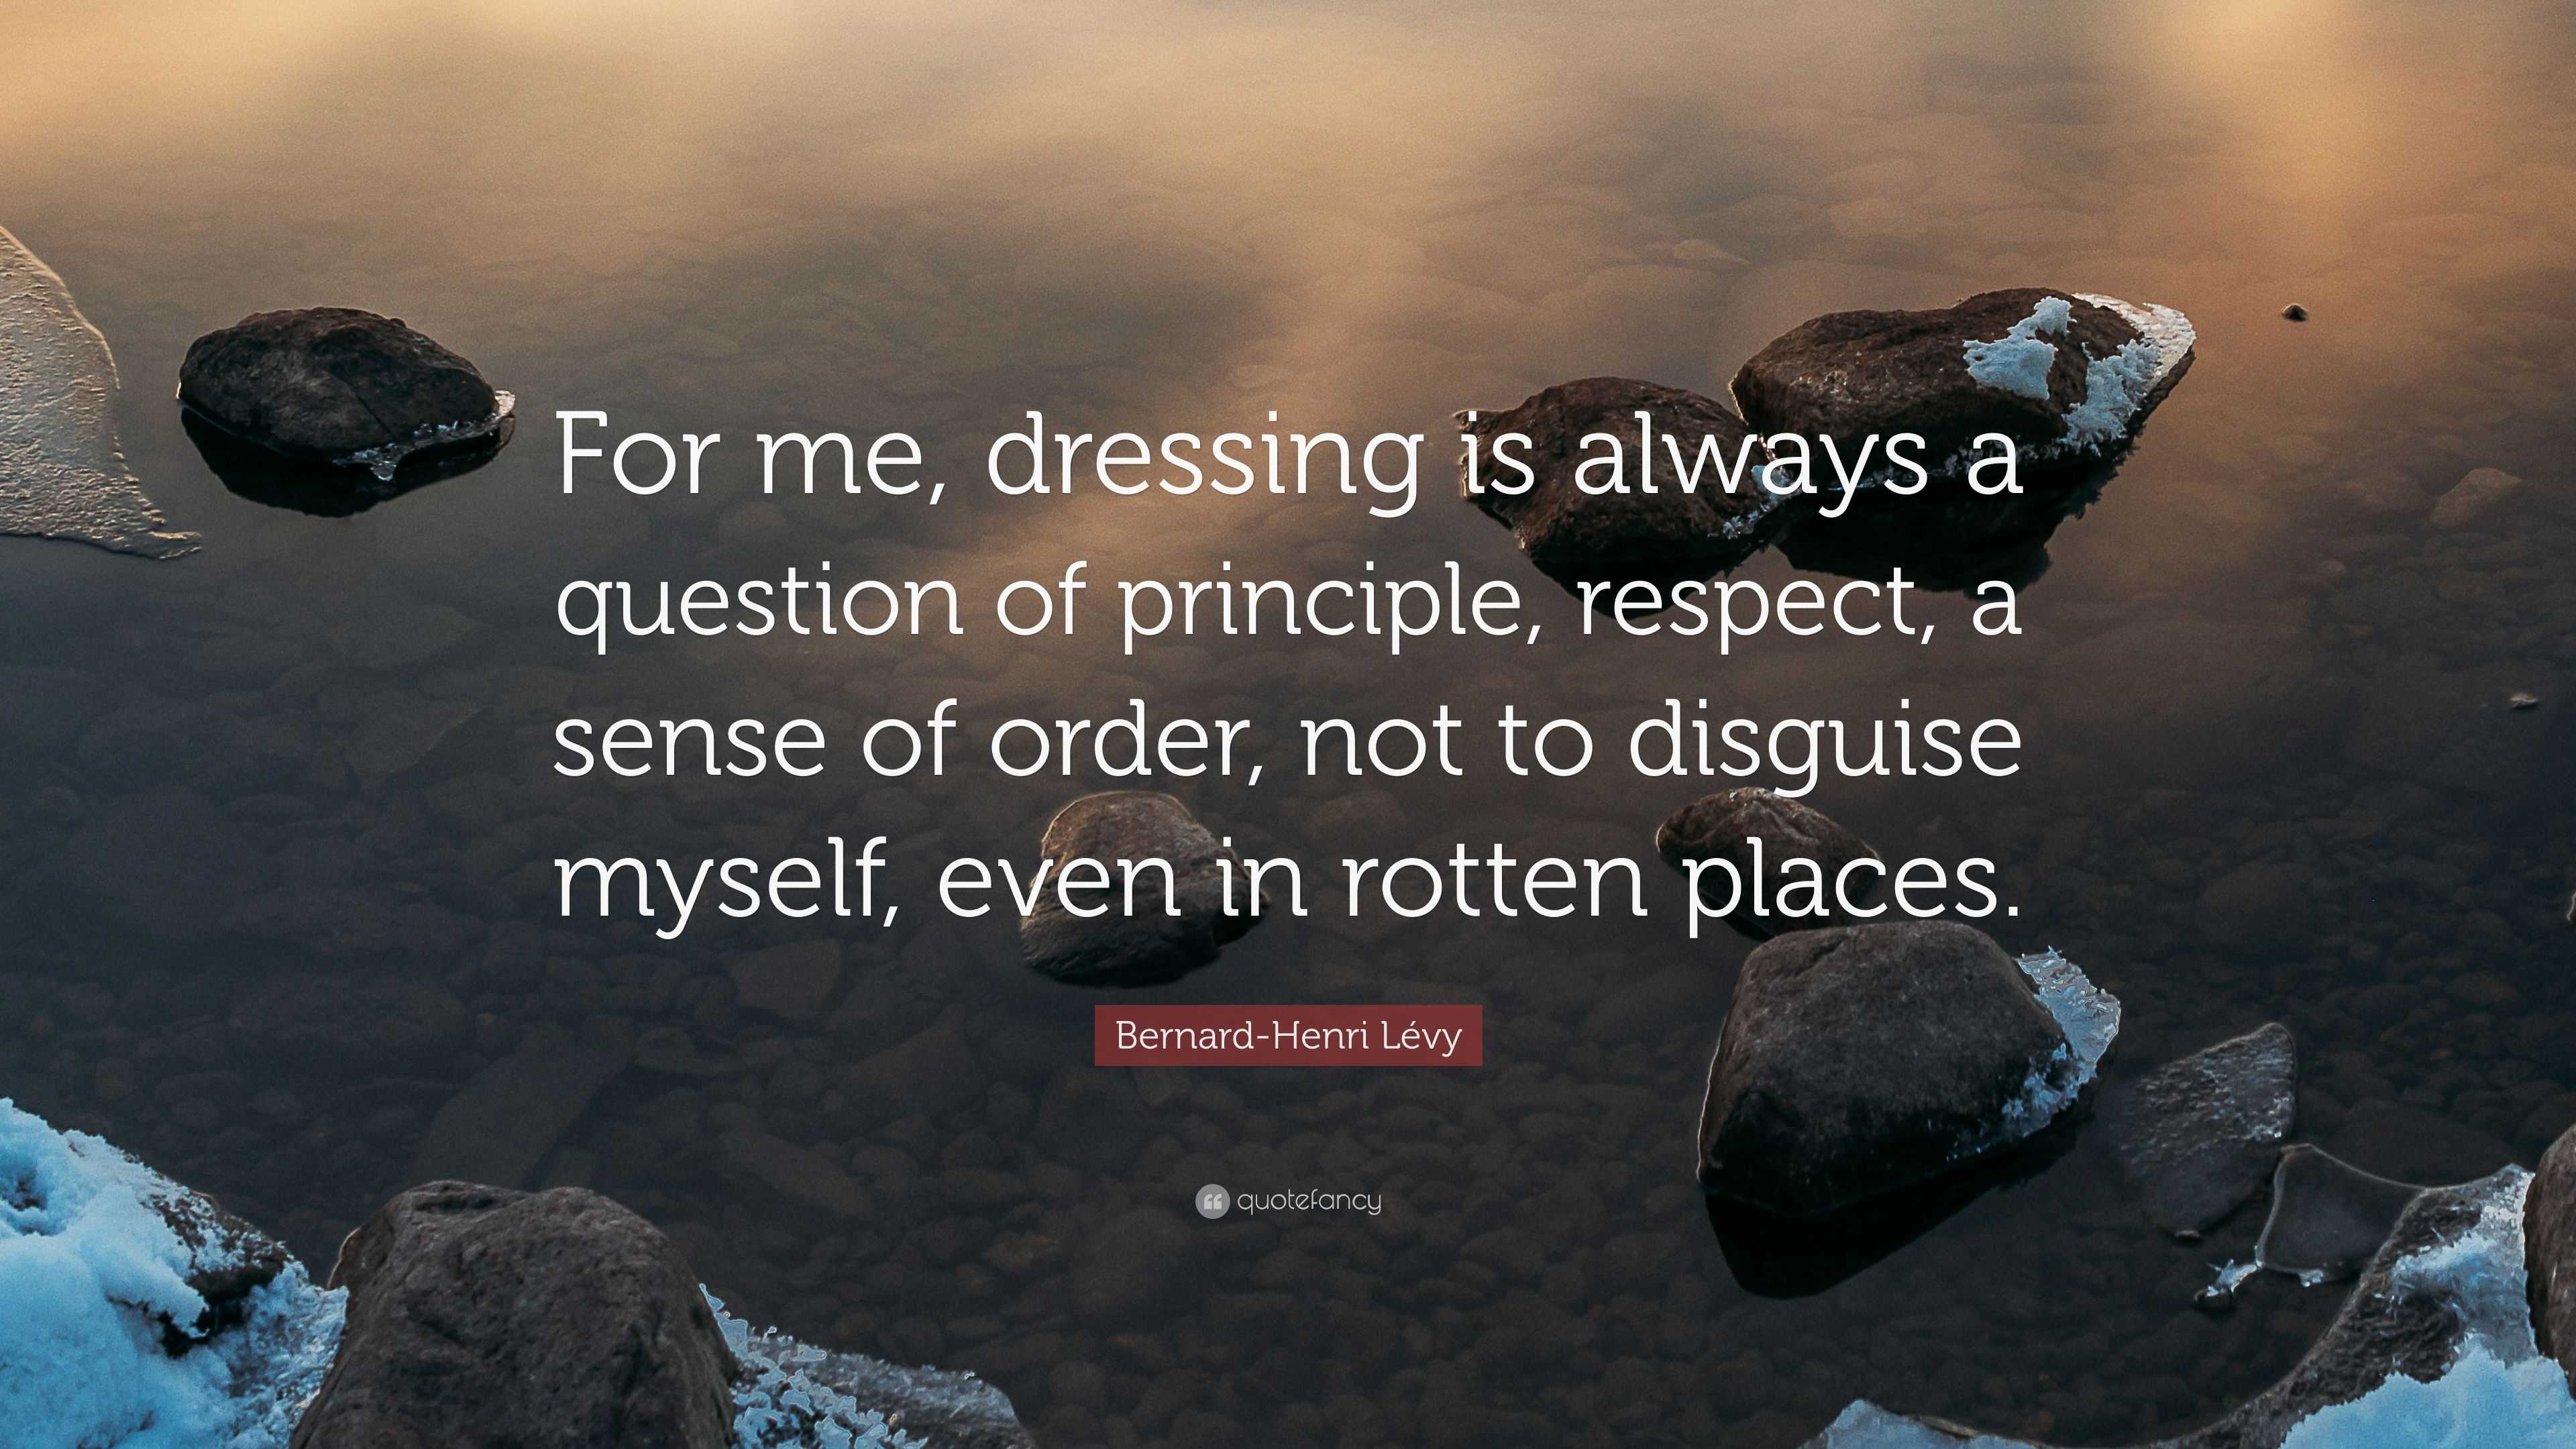 90 Famous Quotes from Fashion Icons - Famous Fashion Quotes From Designers